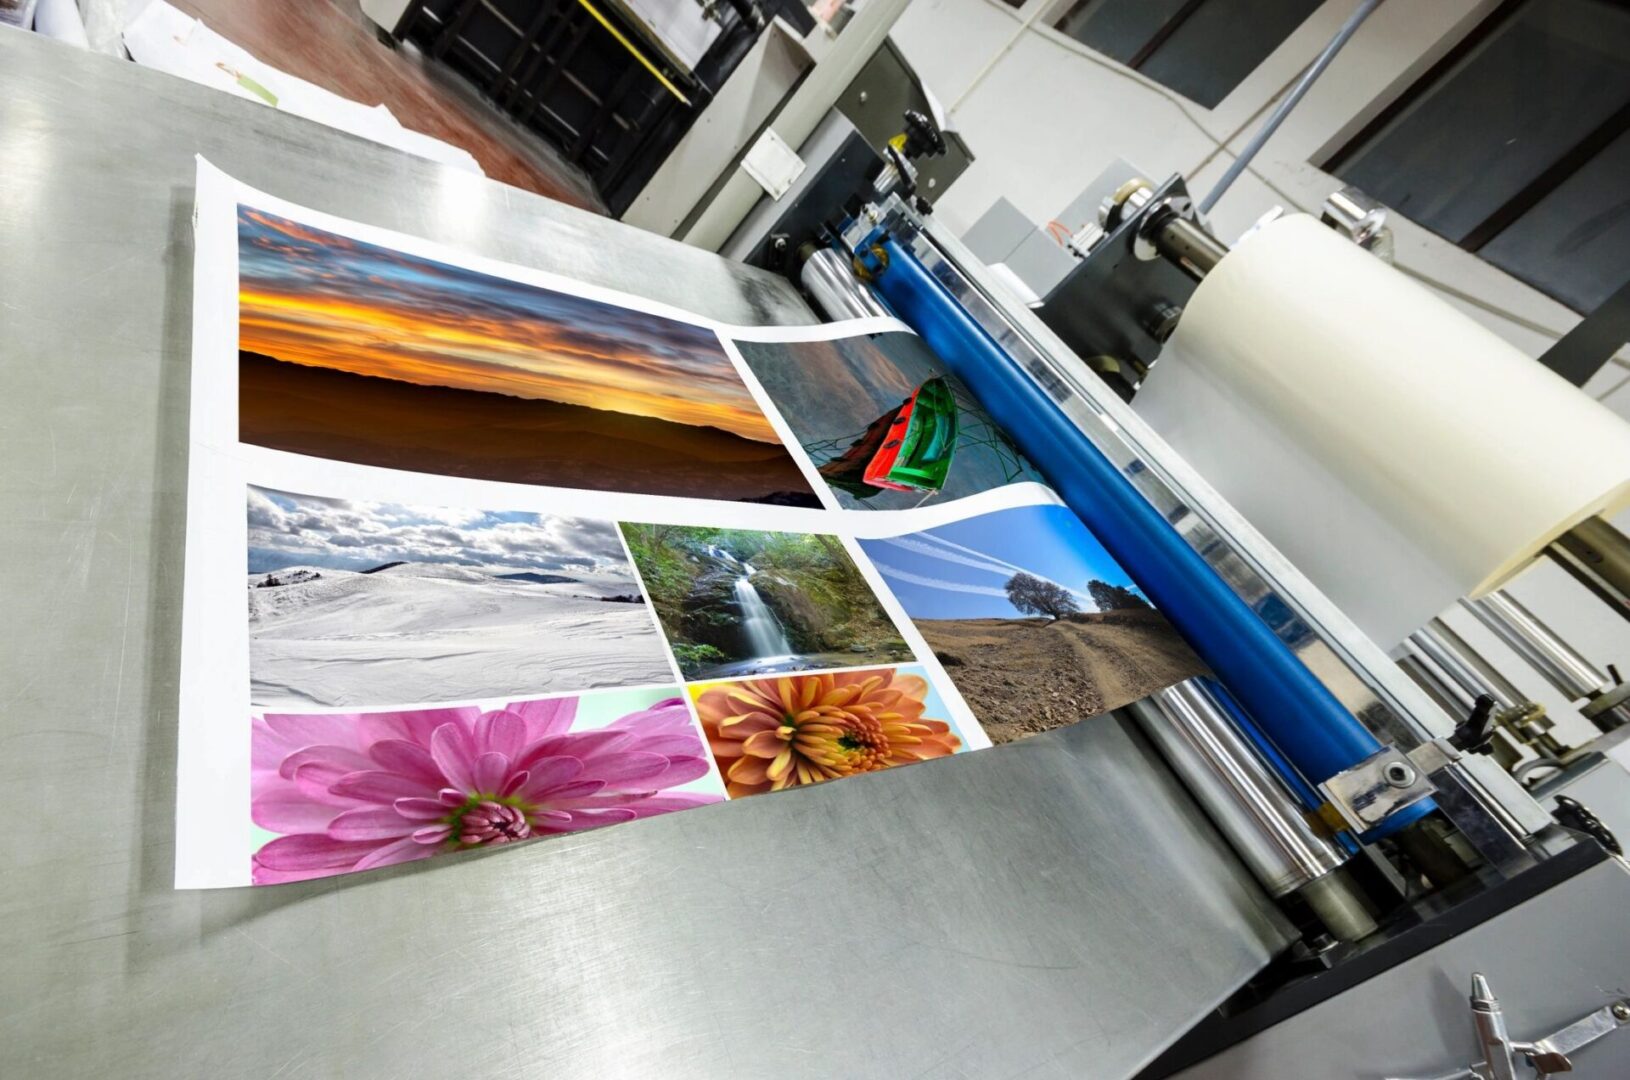 A close up of several pictures on the printing press